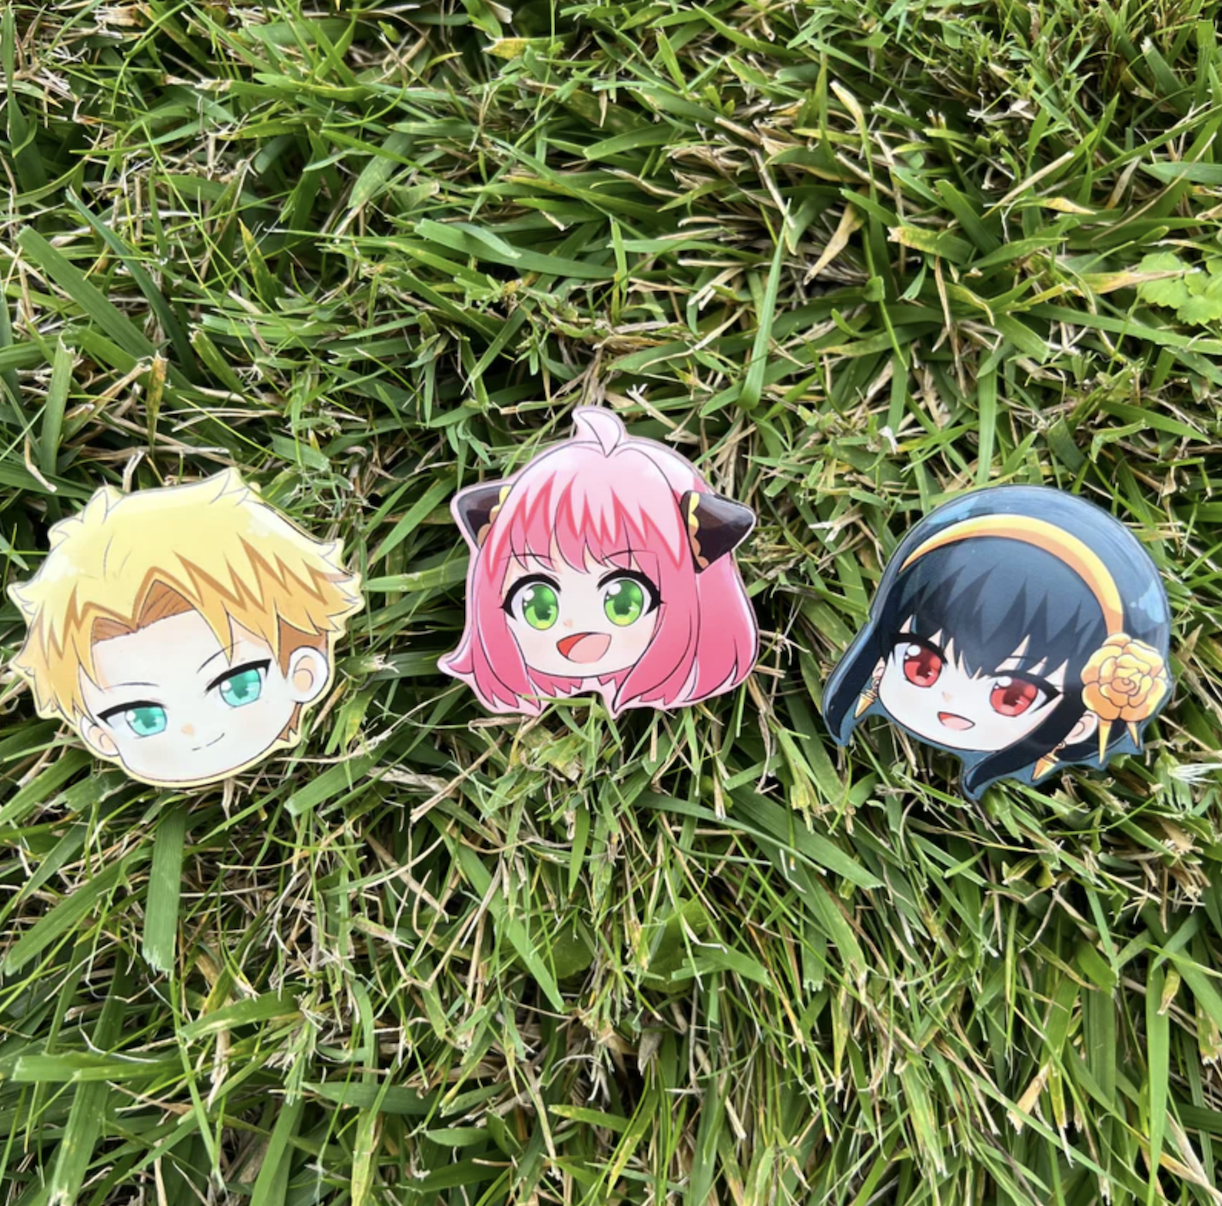 Three anime character keychains are laid out on grass, available for purchase